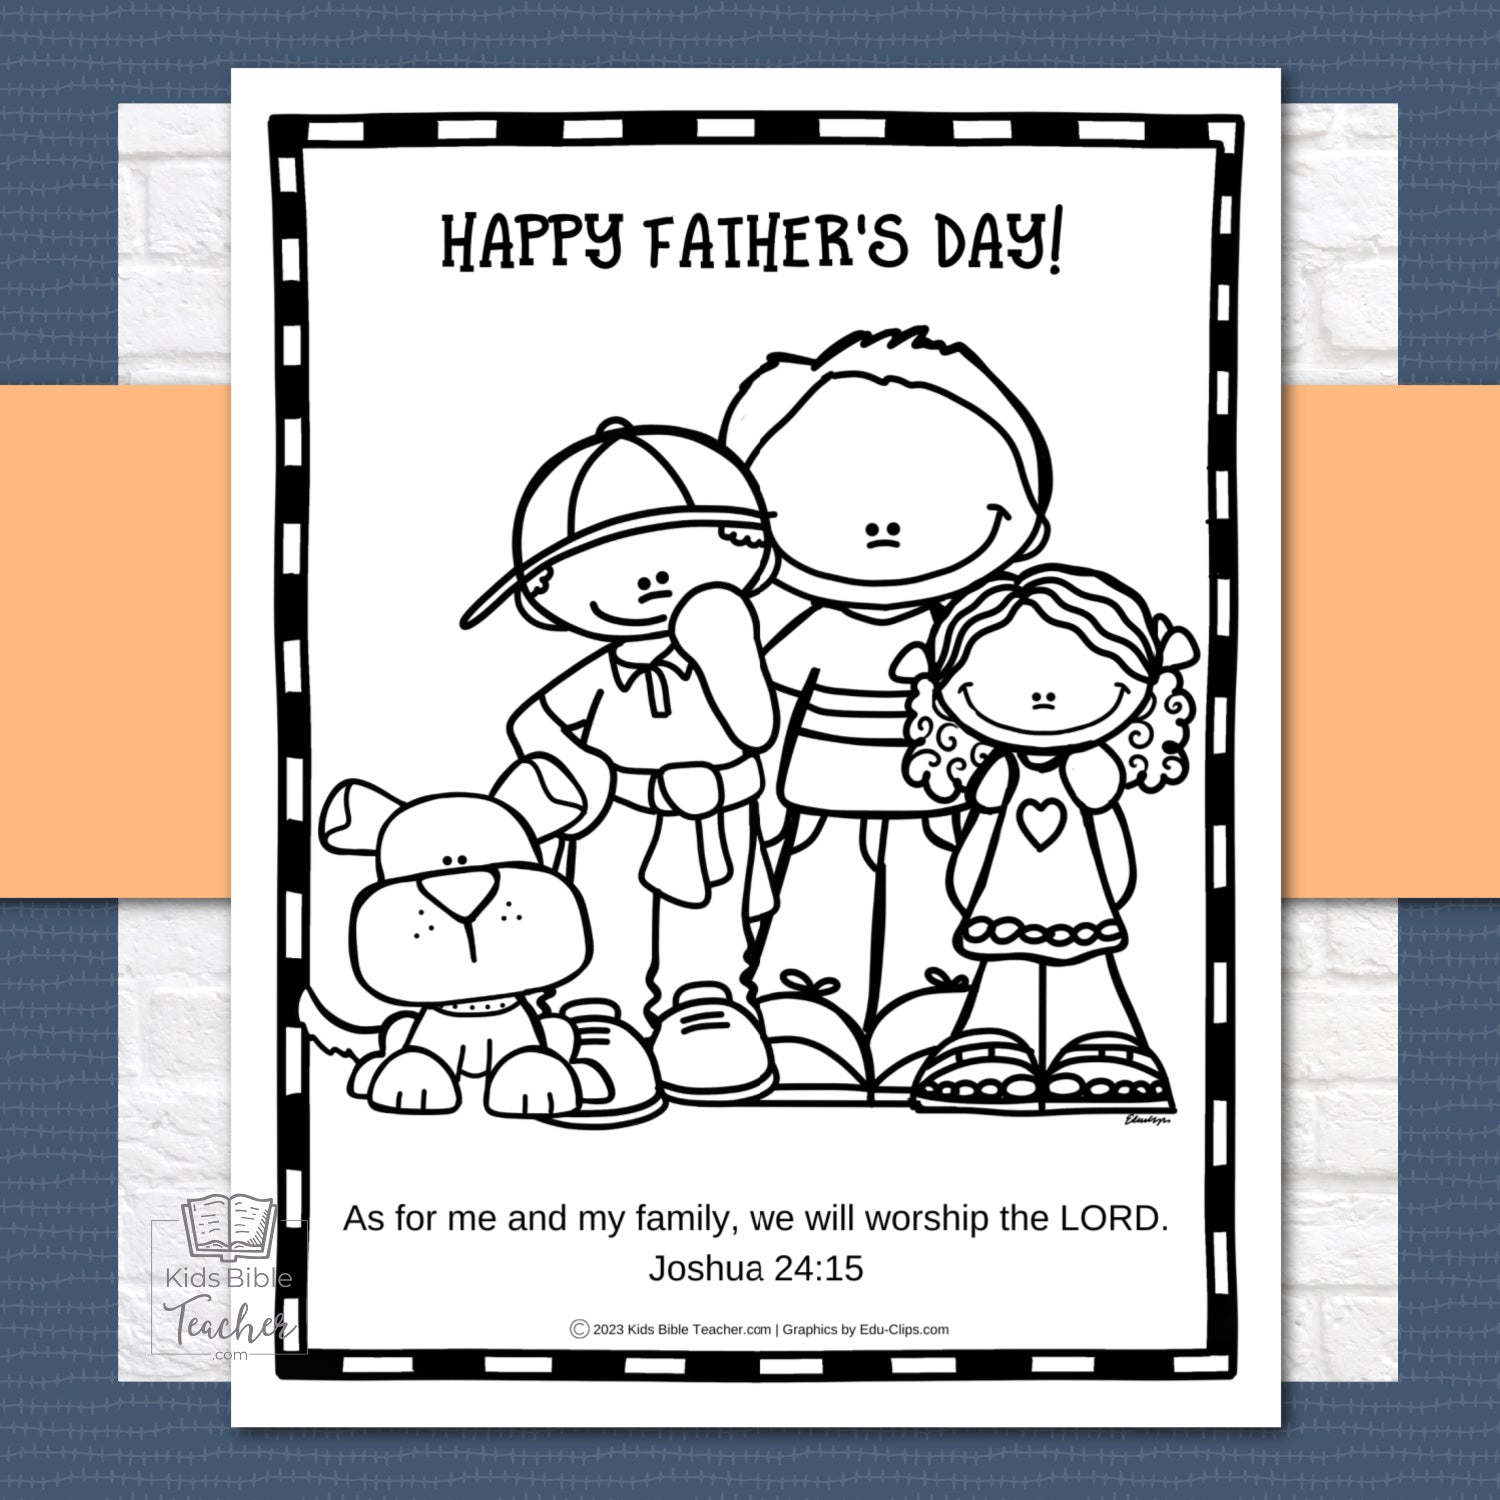 Fathers Day Worksheets Bible Activity Pages for Kids